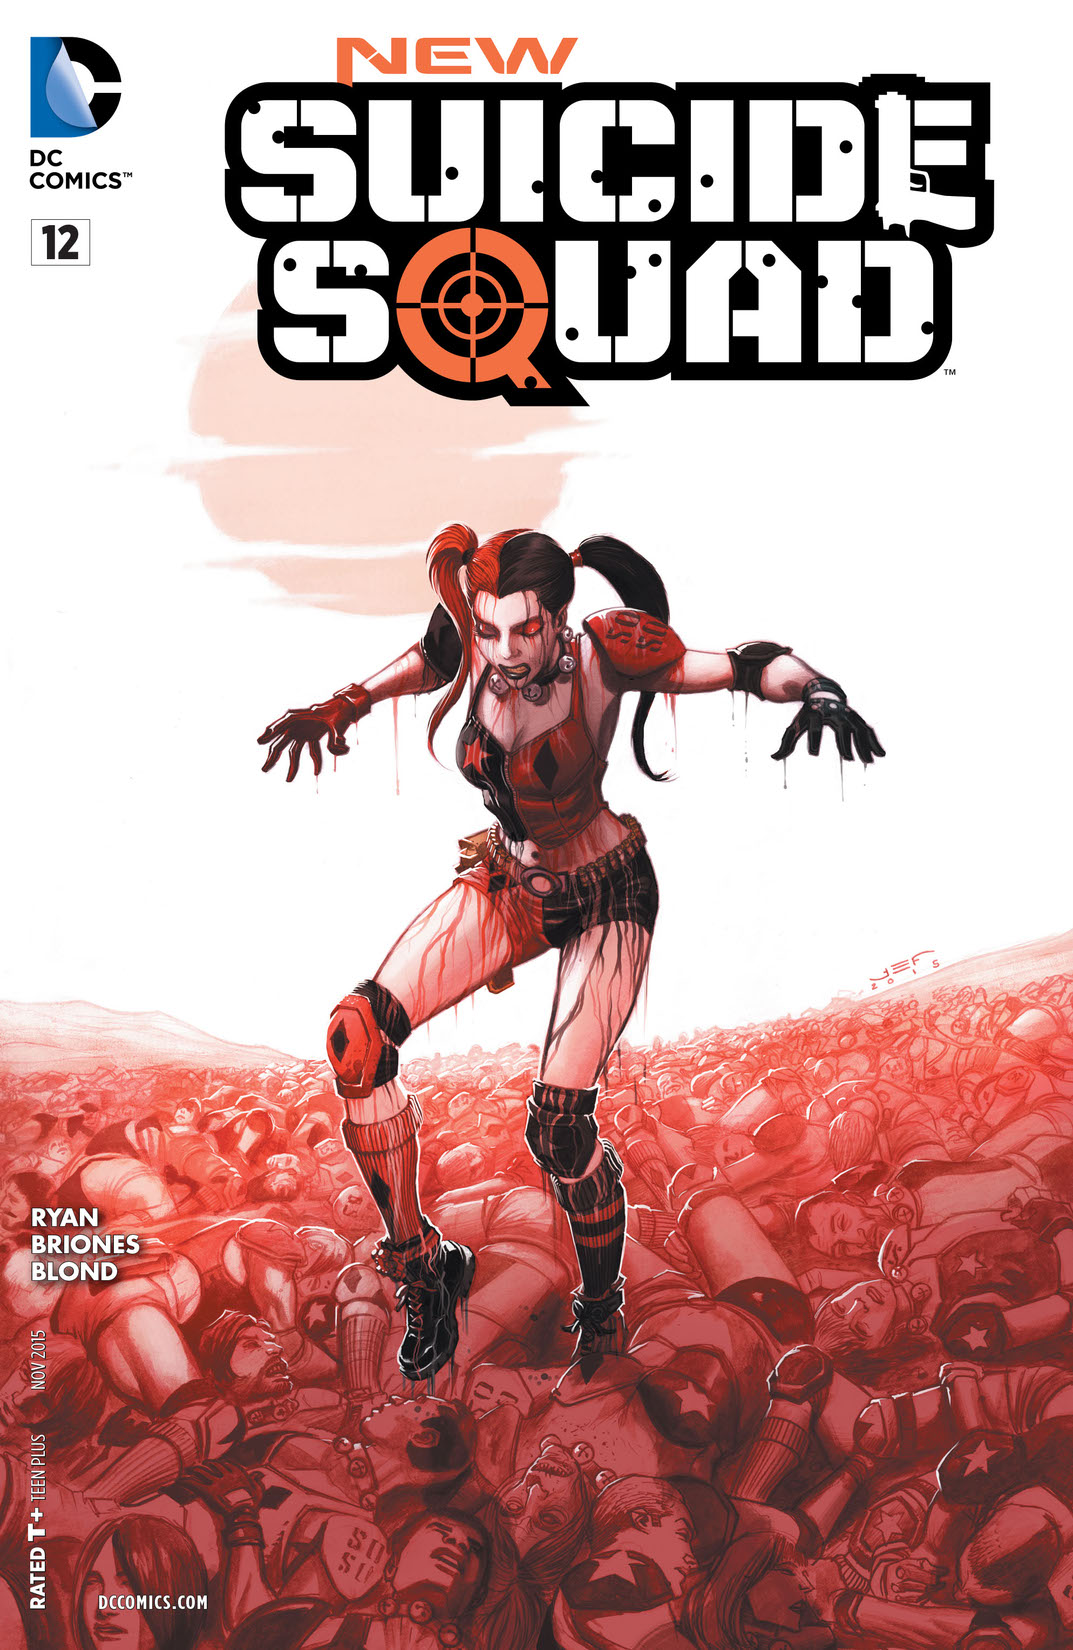 New Suicide Squad #12 preview images